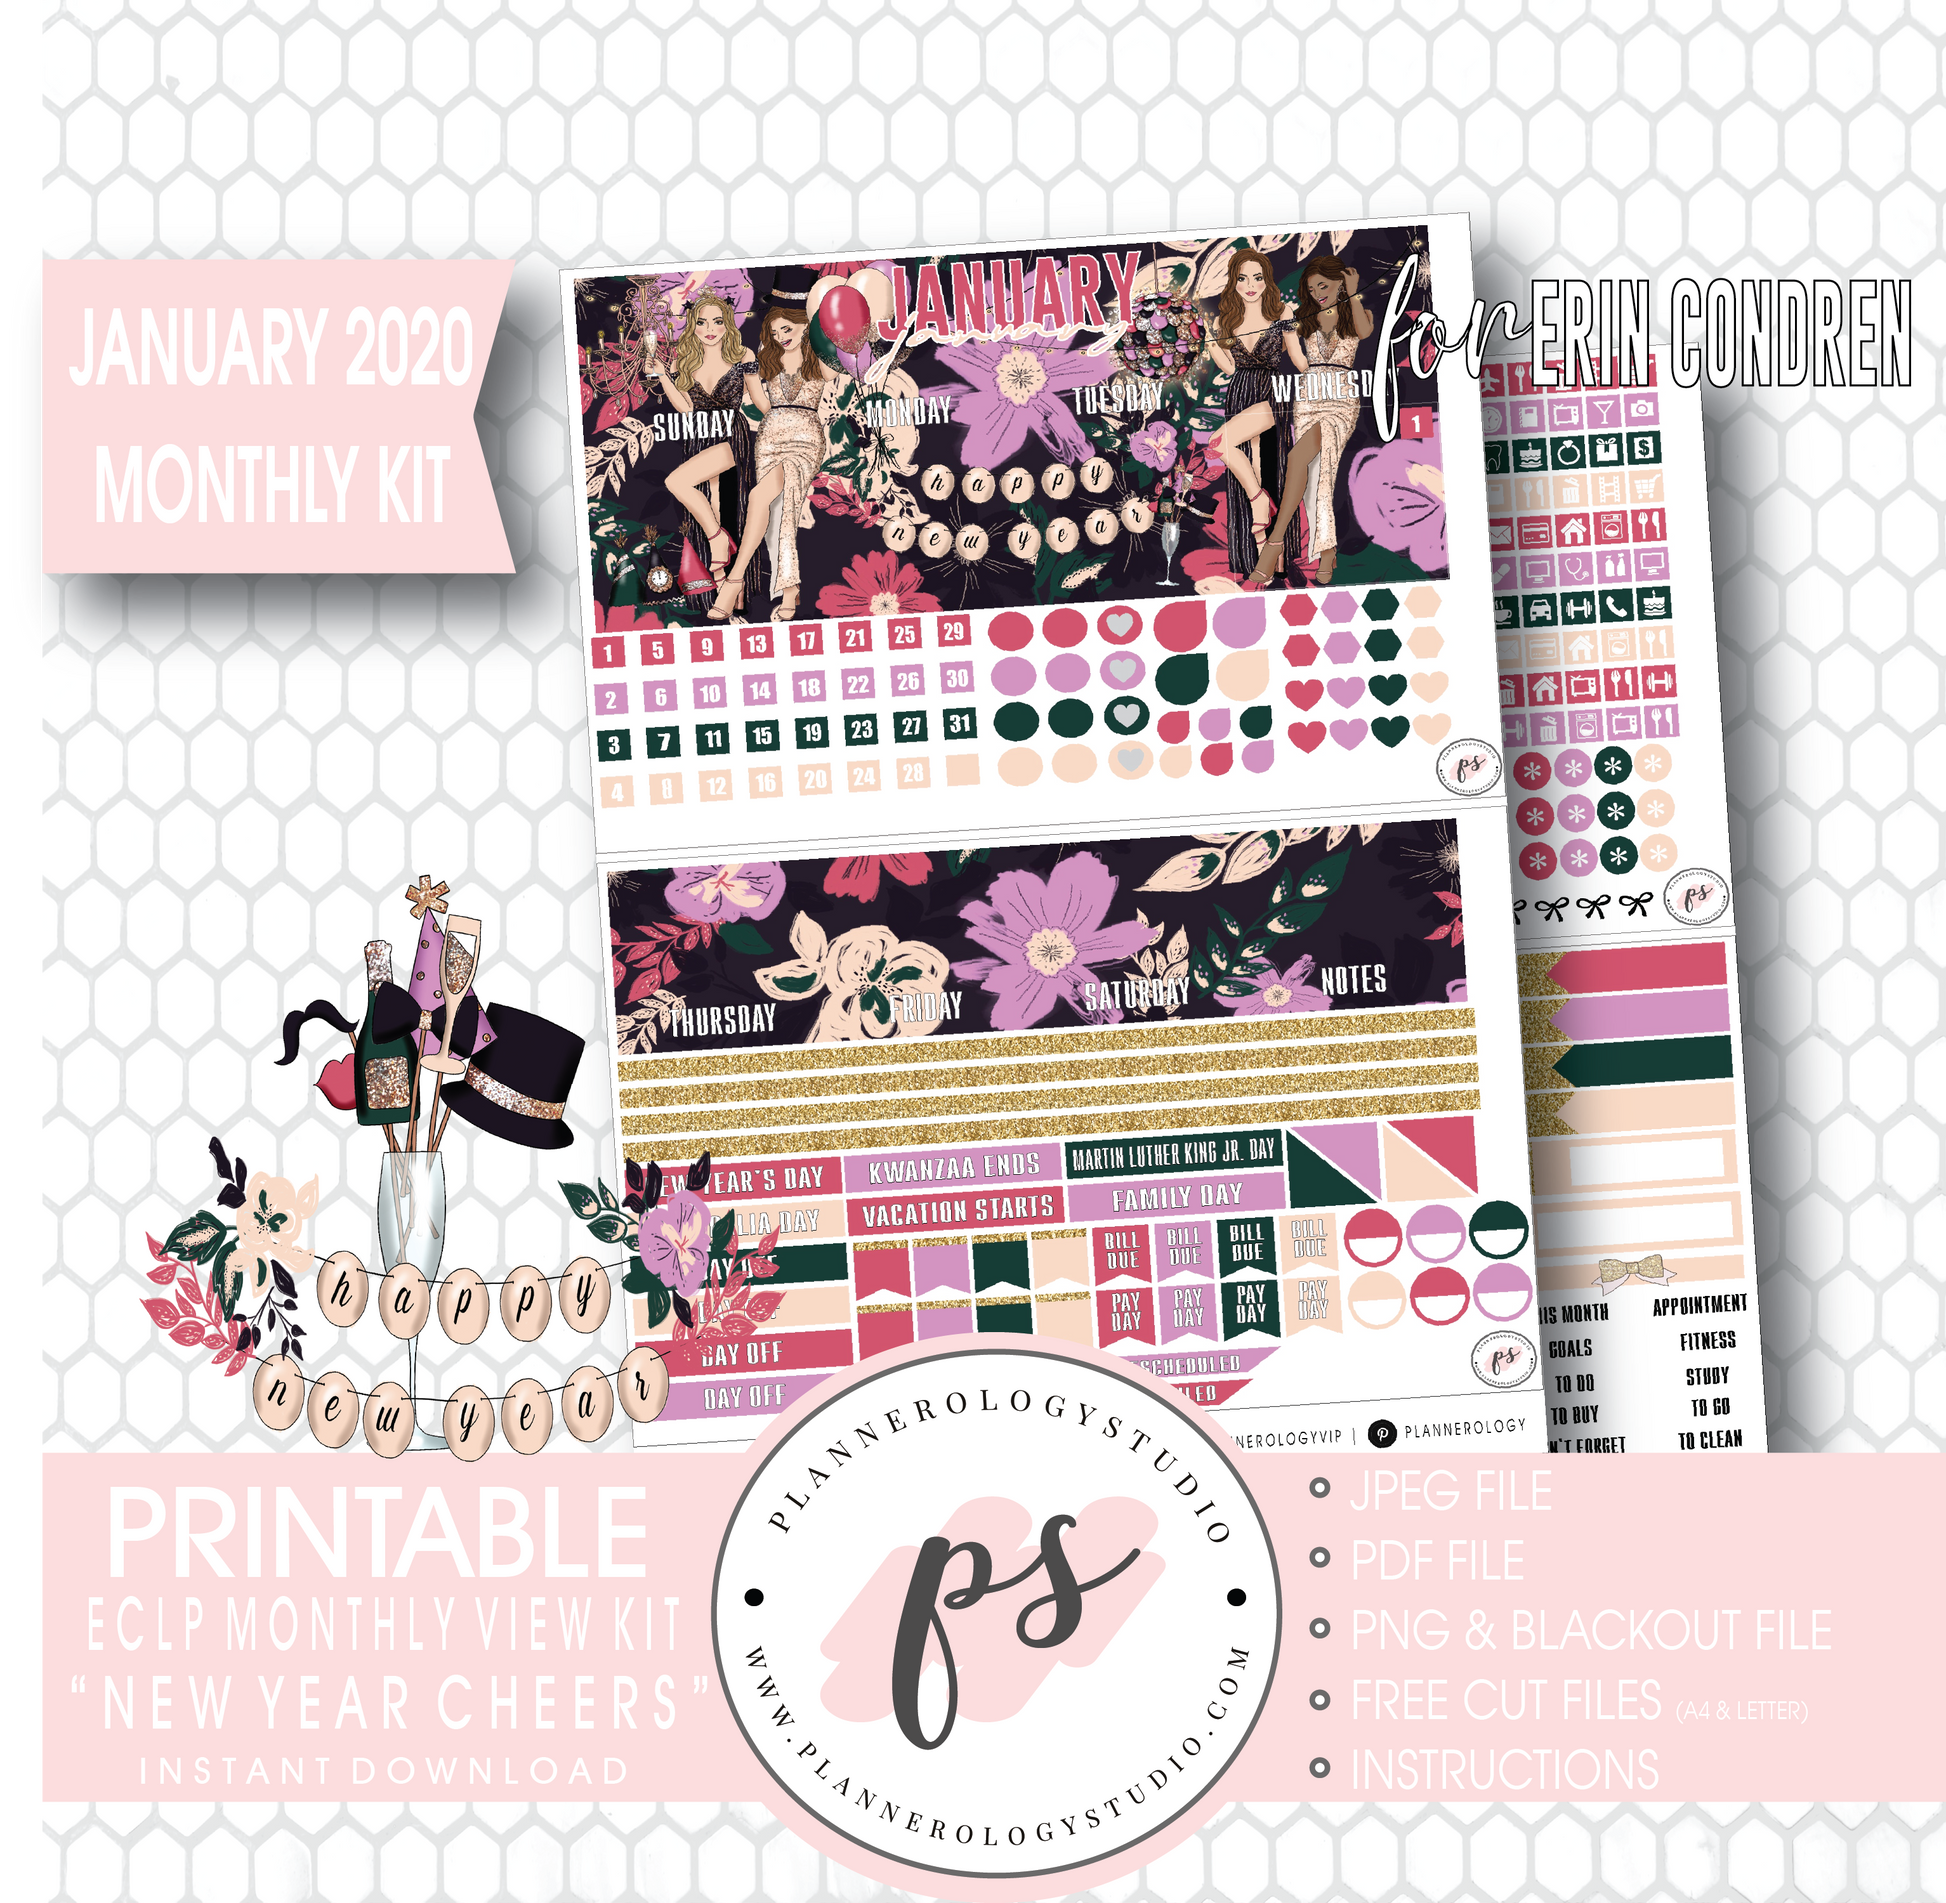 New Year Cheers January 2020 Monthly View Kit Digital Printable Planner Stickers (for use with Erin Condren) - Plannerologystudio